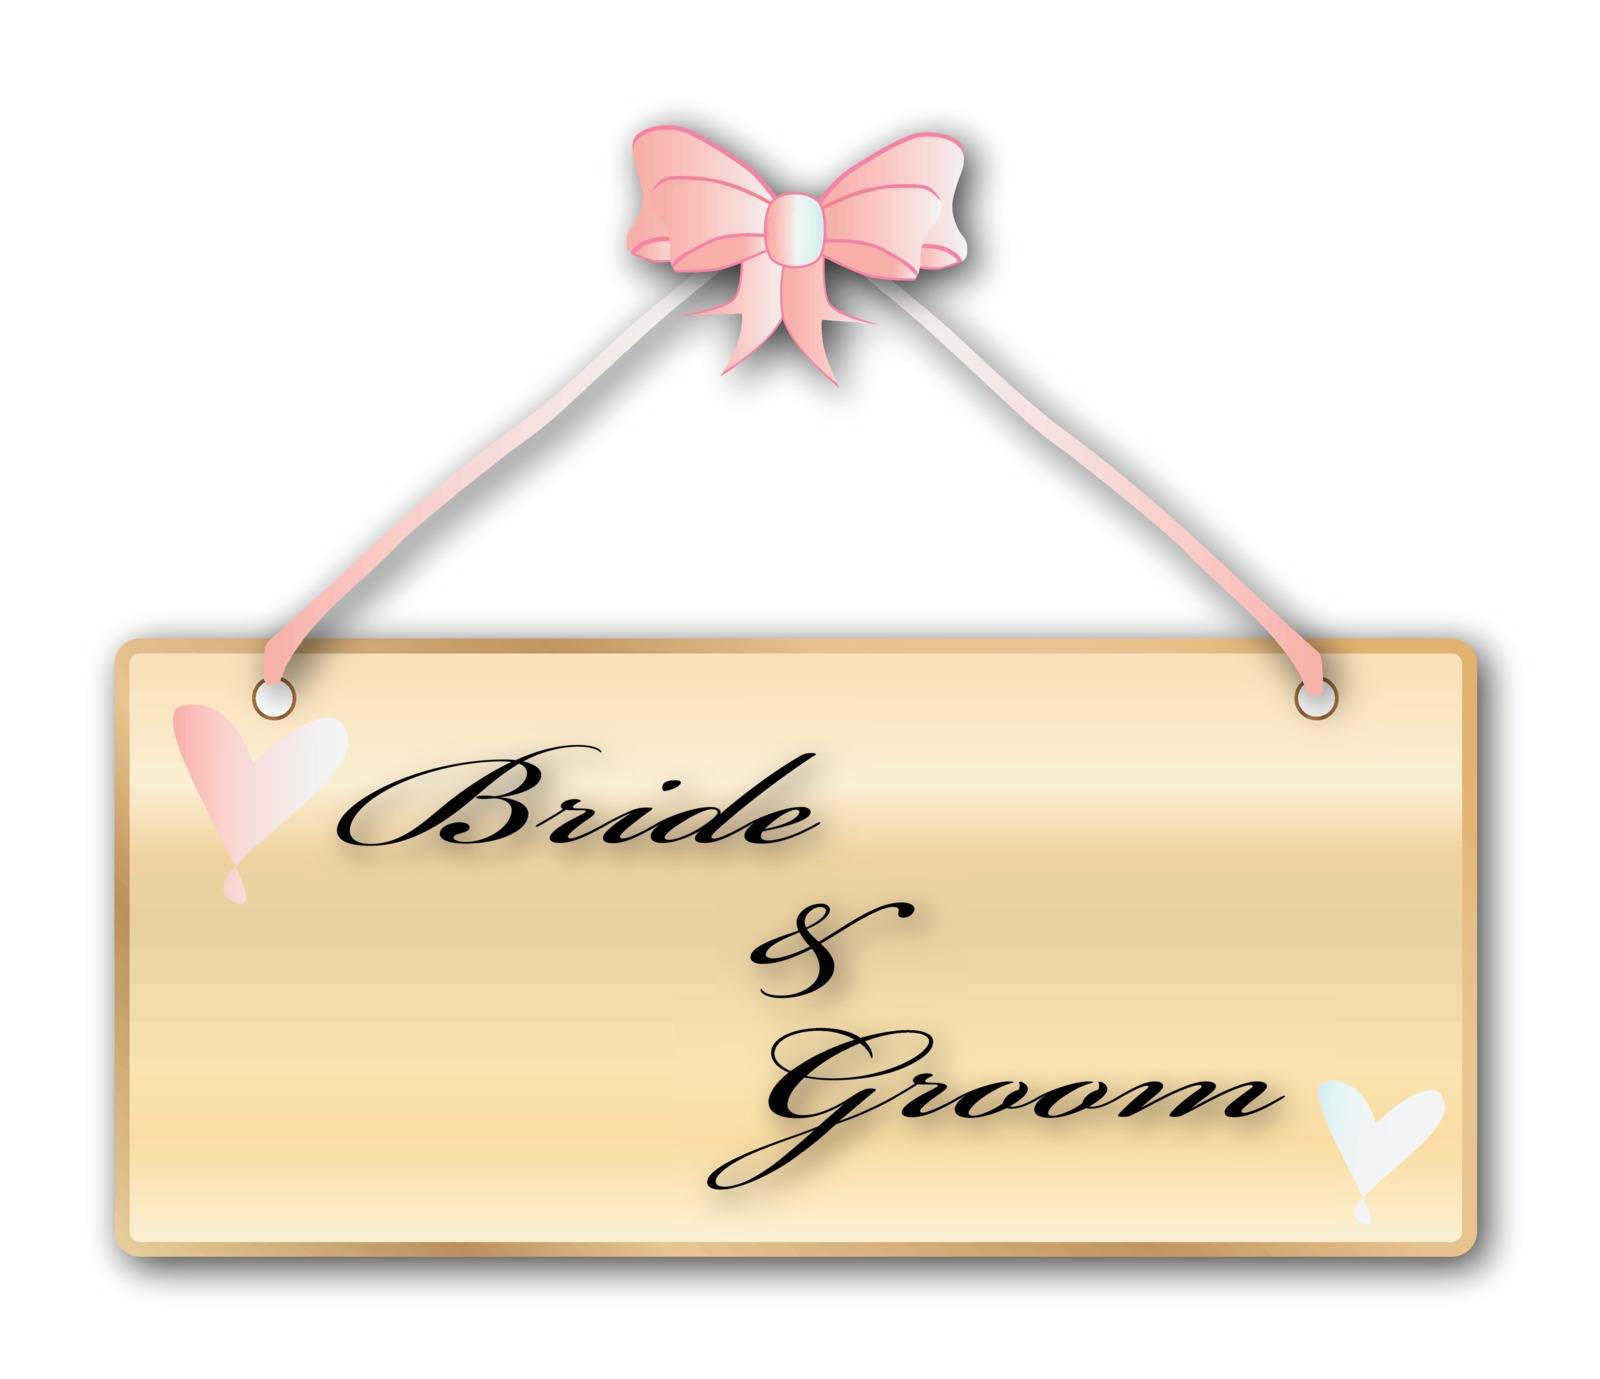 Bride, groom, sign in woodgrain with light pink ribbon and bow over a white background with love cartoon hearts